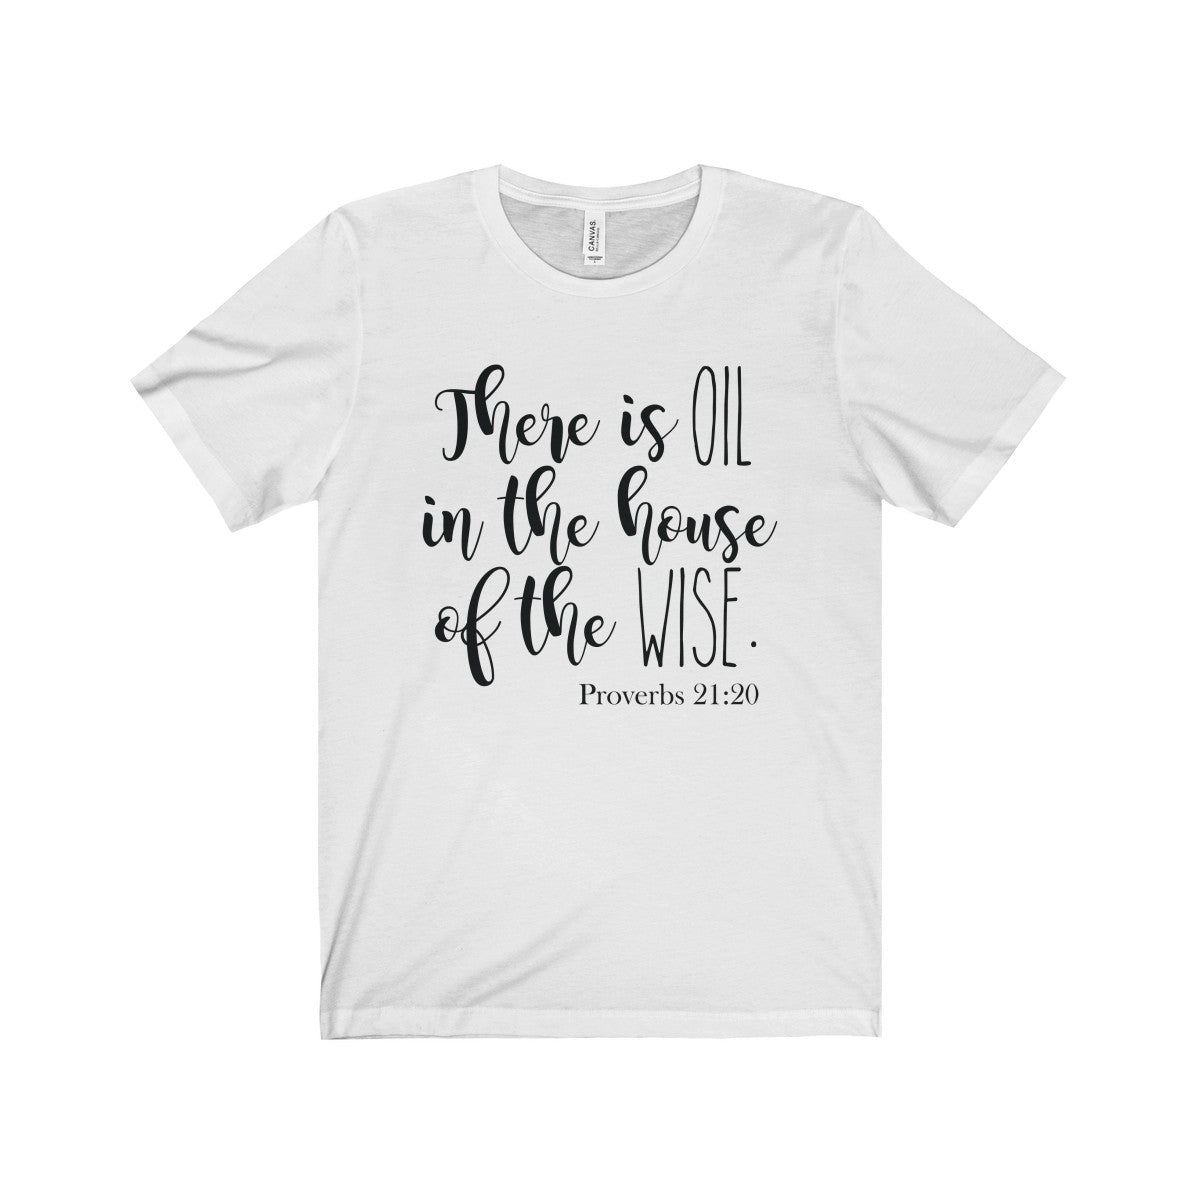 There Is Oil in the House of the Wise Shirt! | Farmhouse Vinyl Co.